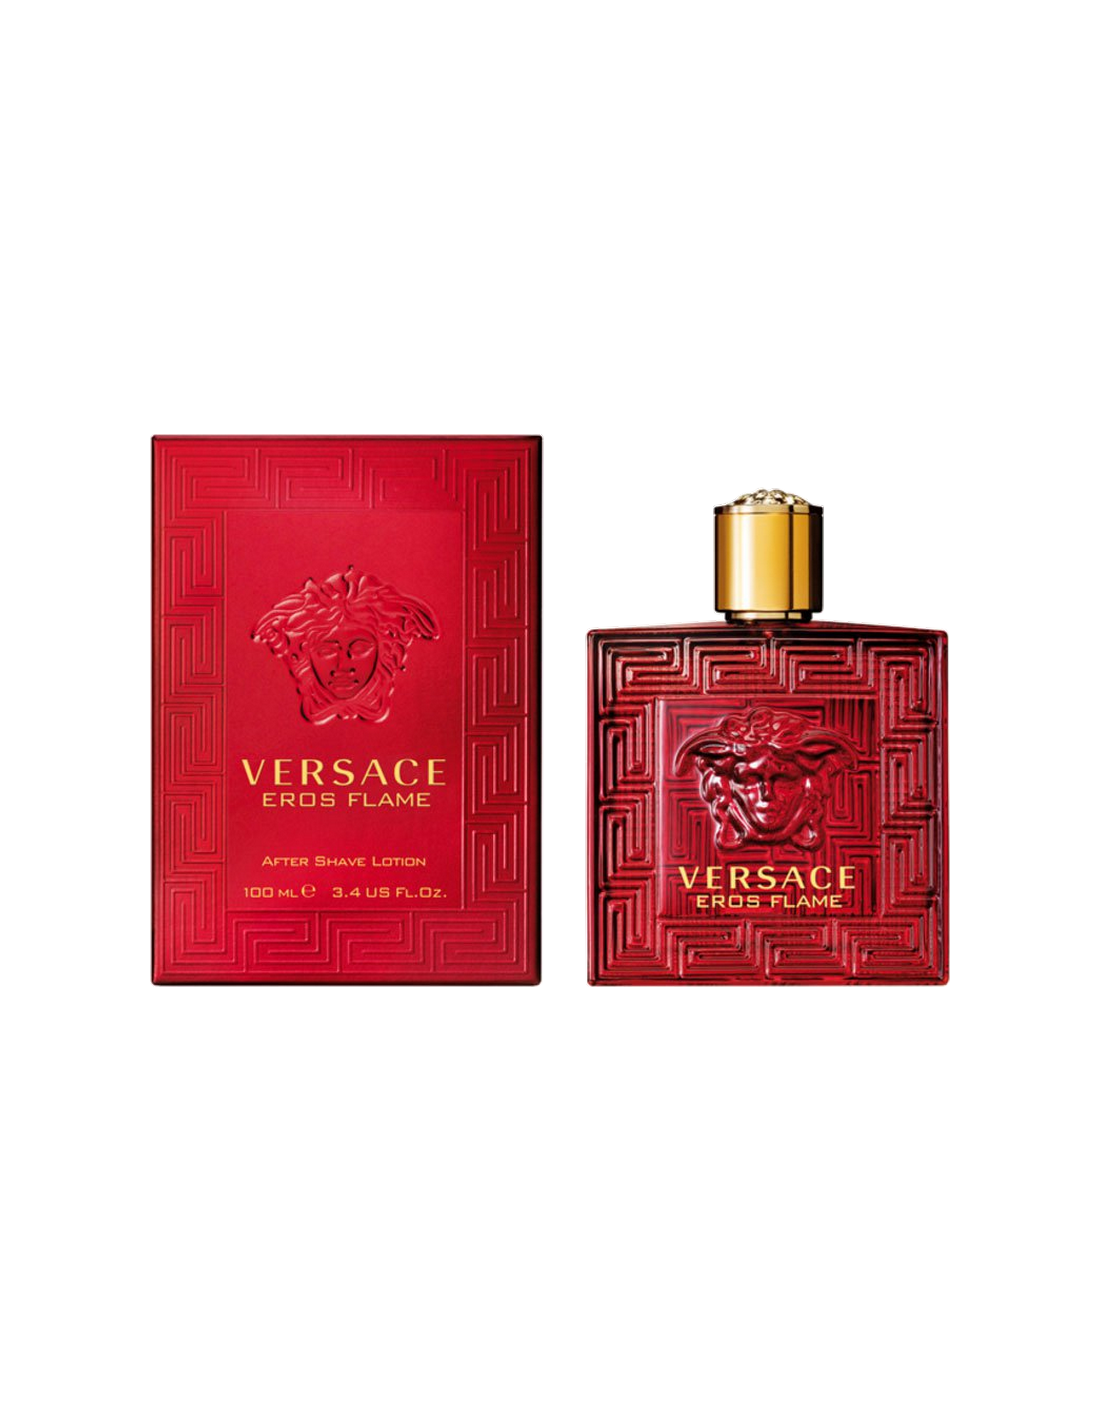 Versace Eros Flame After Shave Lotion|Versace viso uomo